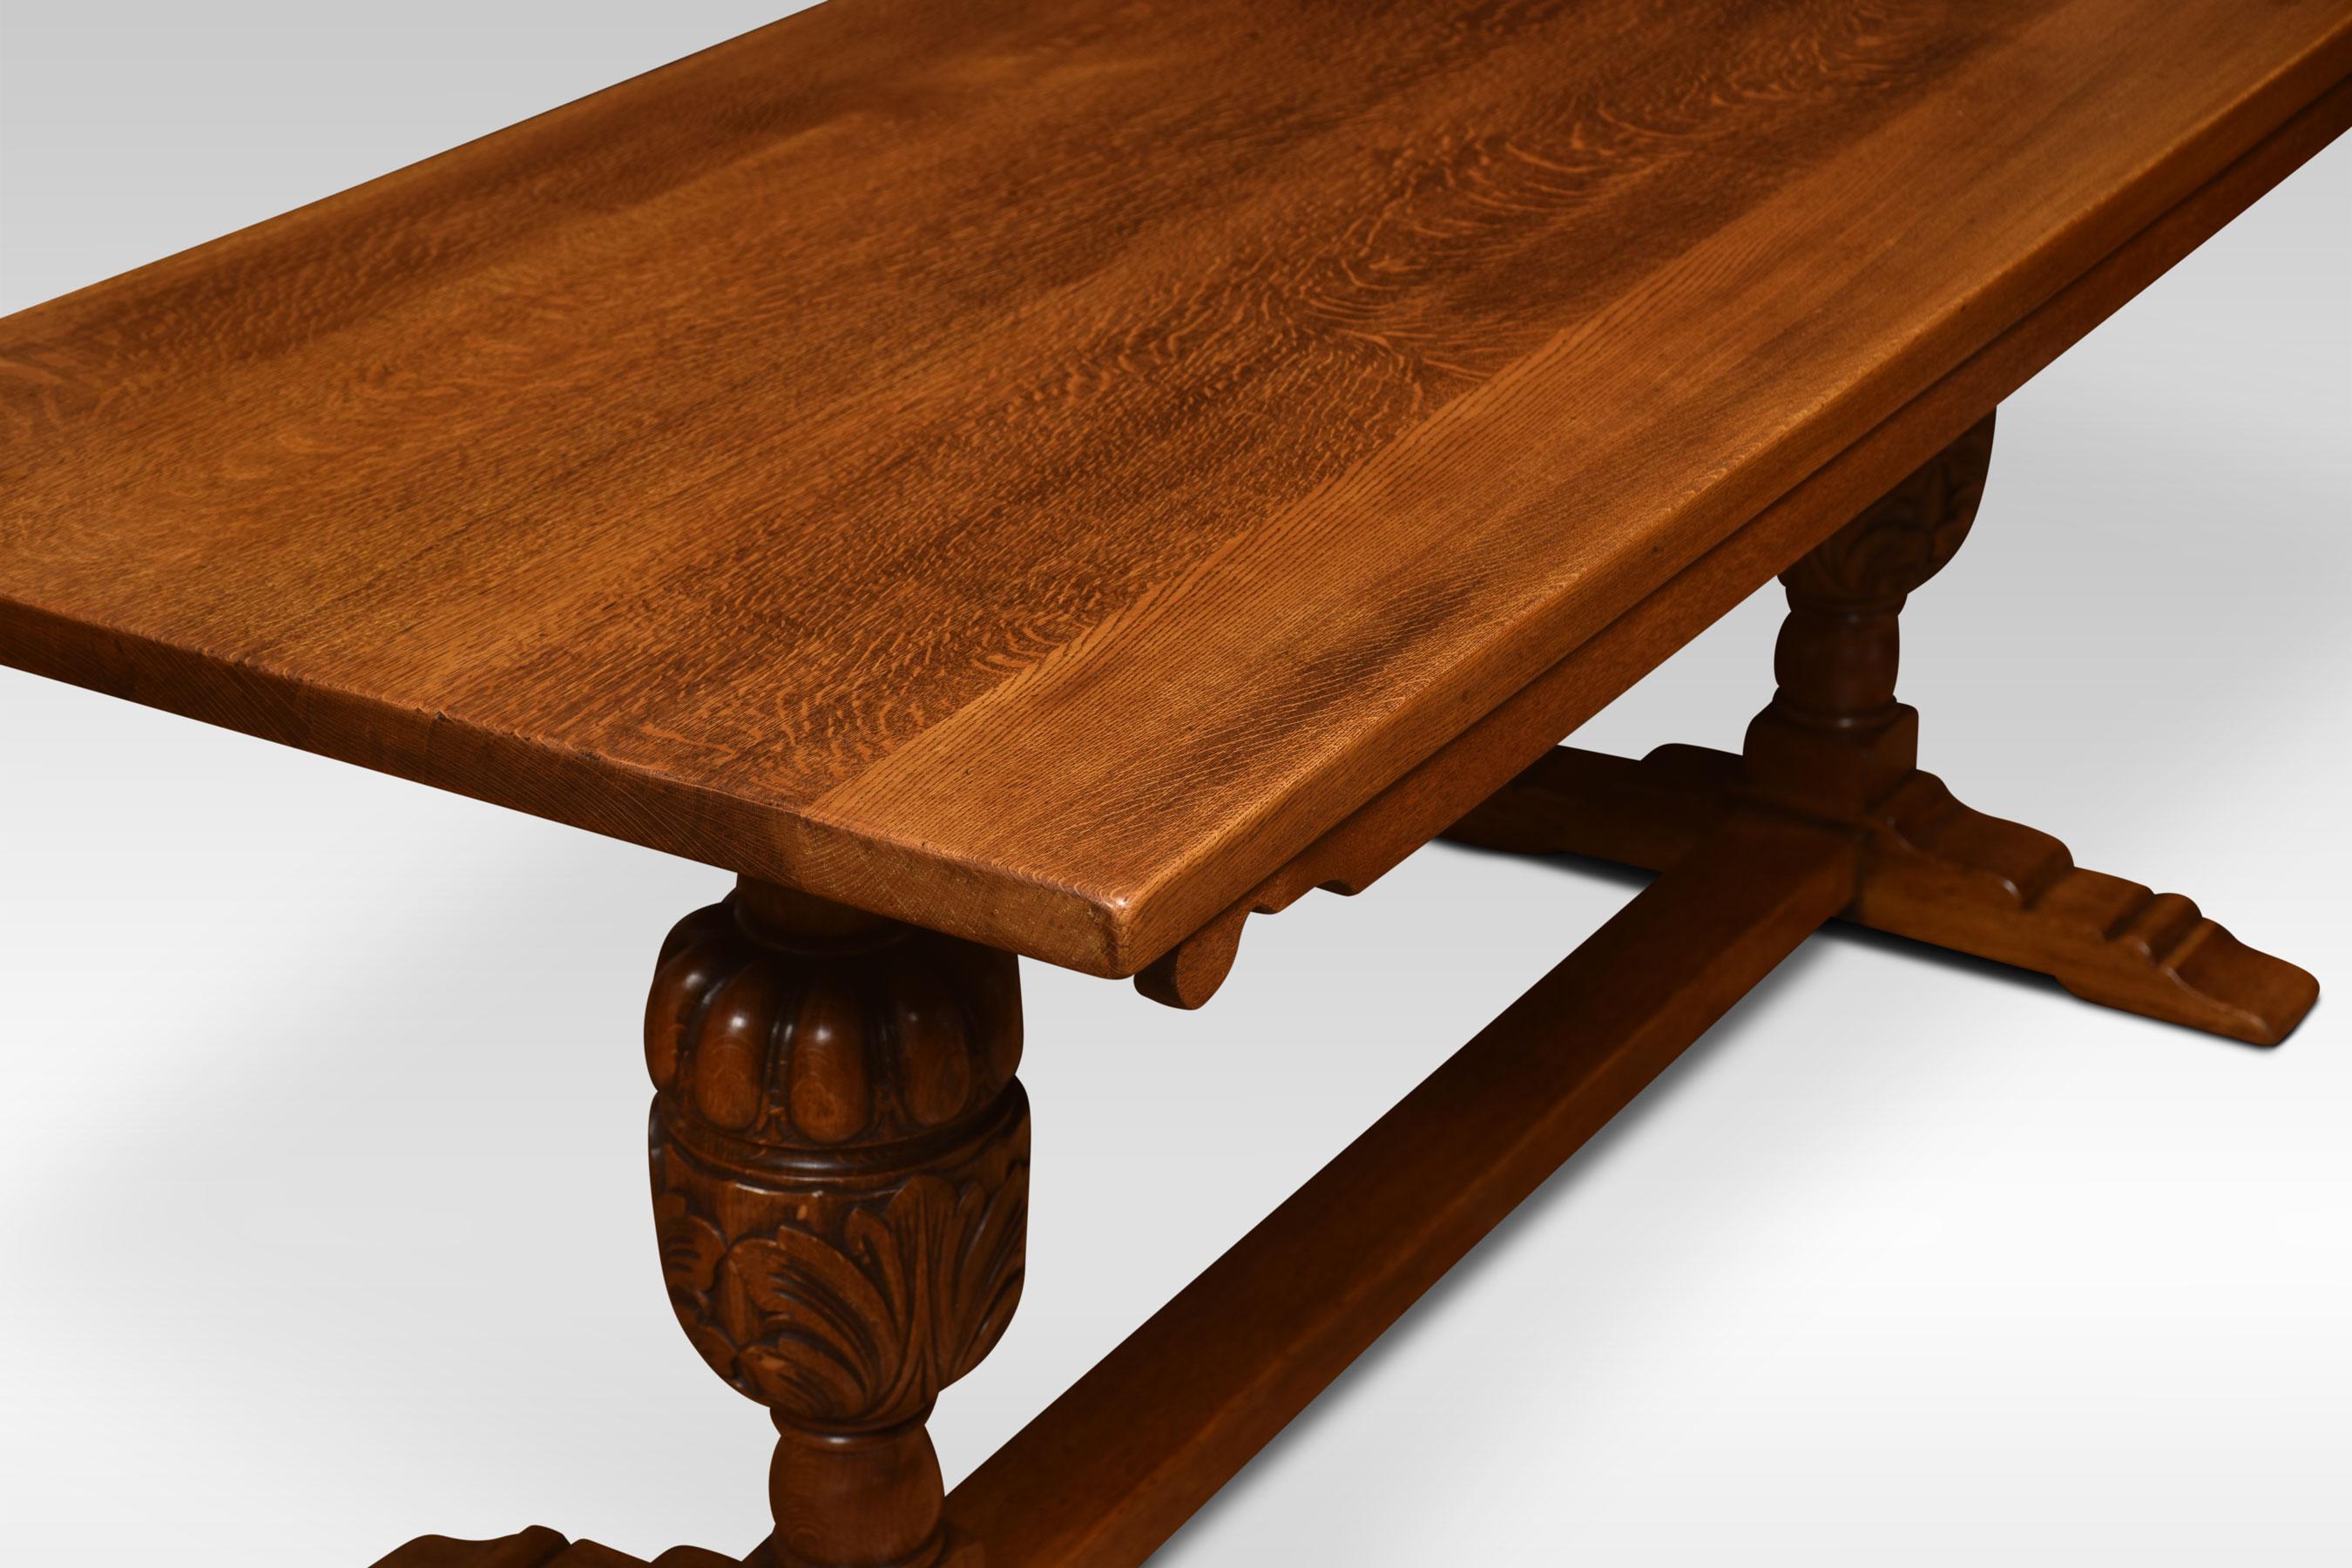 Oak refectory table, the rectangular solid oak top. Above carved bulbous cup and cover supports united by a stretcher.
Dimensions
Height 29.5 inches
Width 72 inches
Depth 29.5 inches.